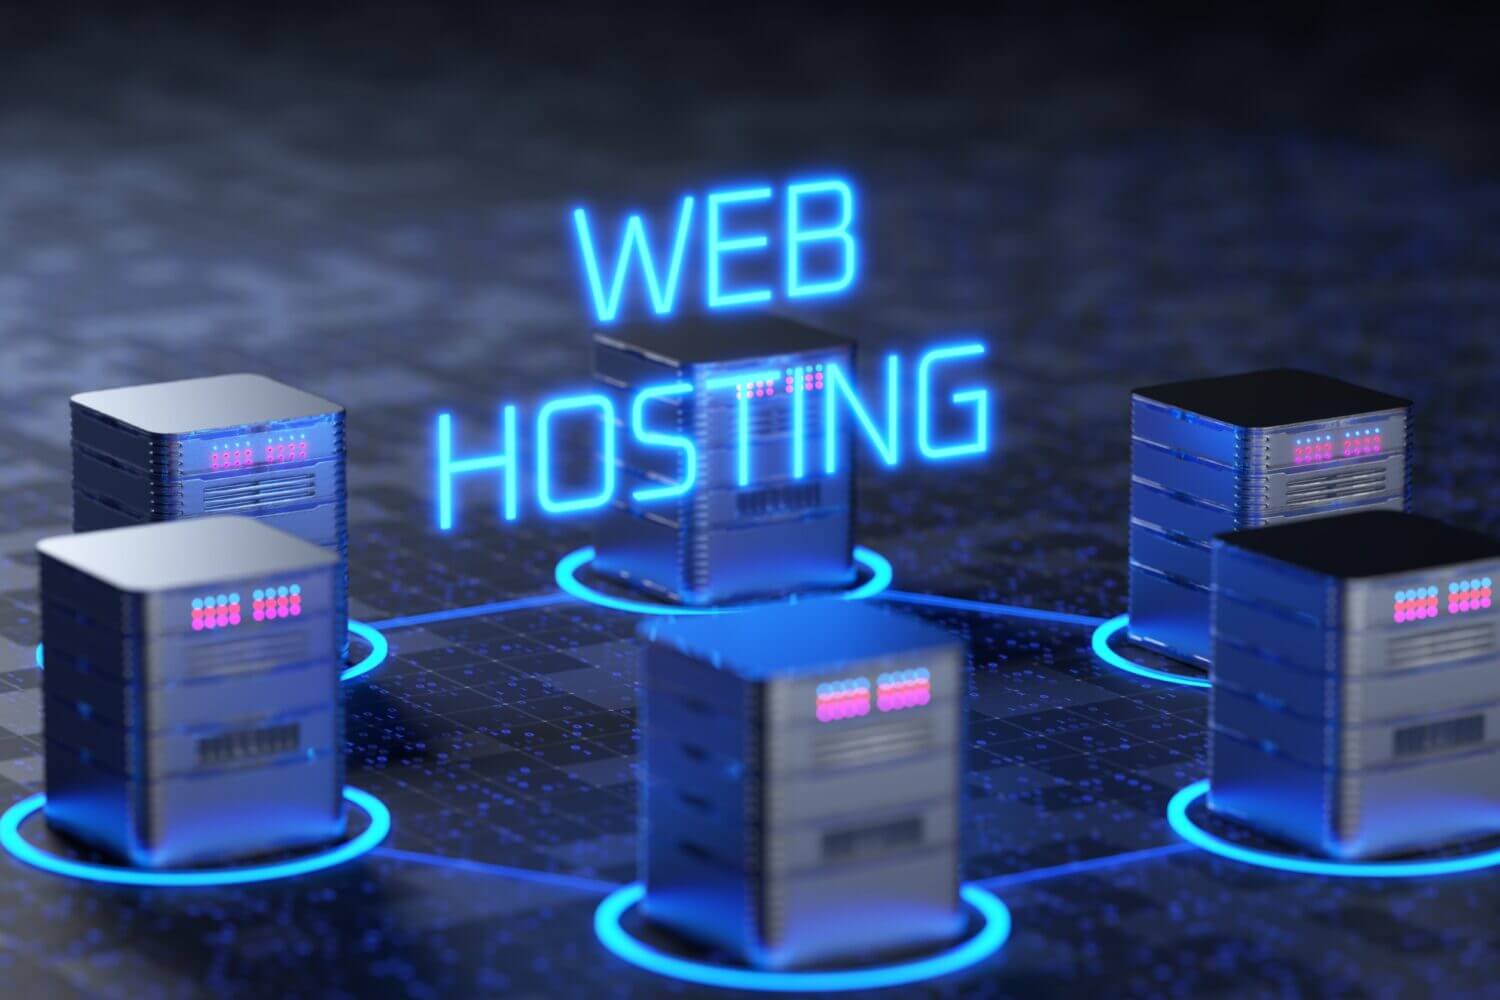 Could Web Hosting Concept